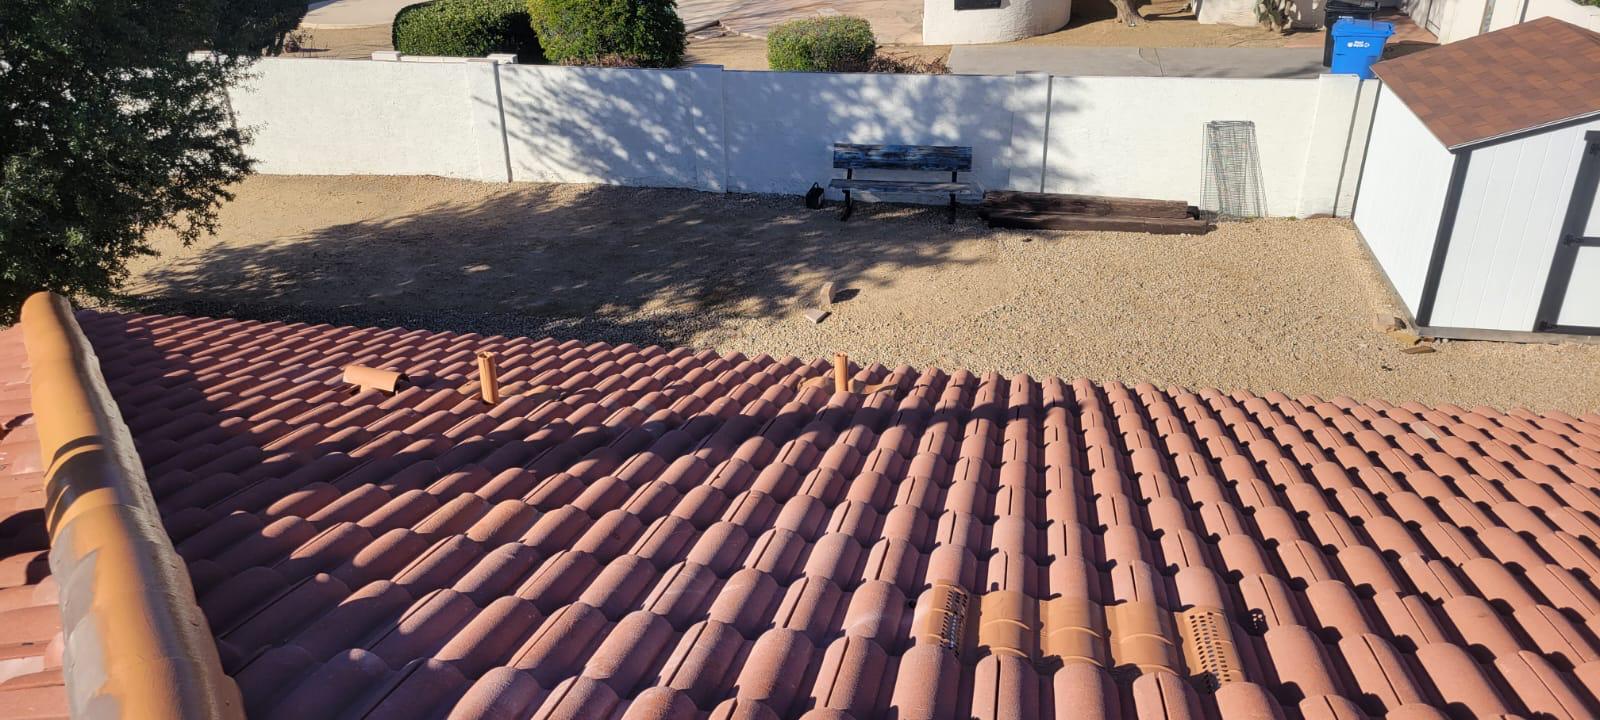 The focus and skill of a Behmer roofer during a tile re-felt project in Desert Mountain, Scottsdale.